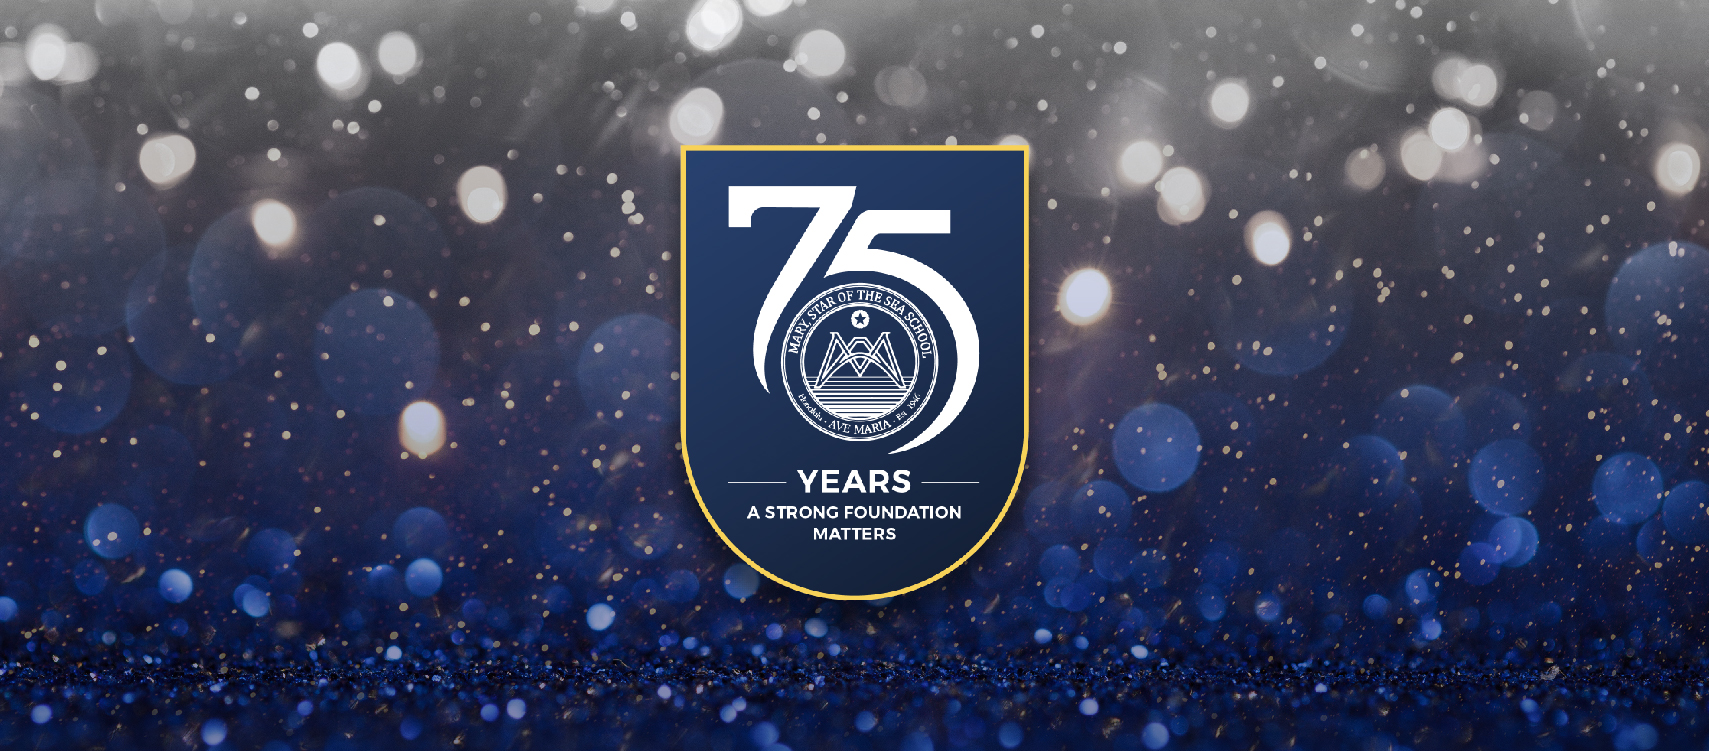 Celebrating our 75th Anniversary